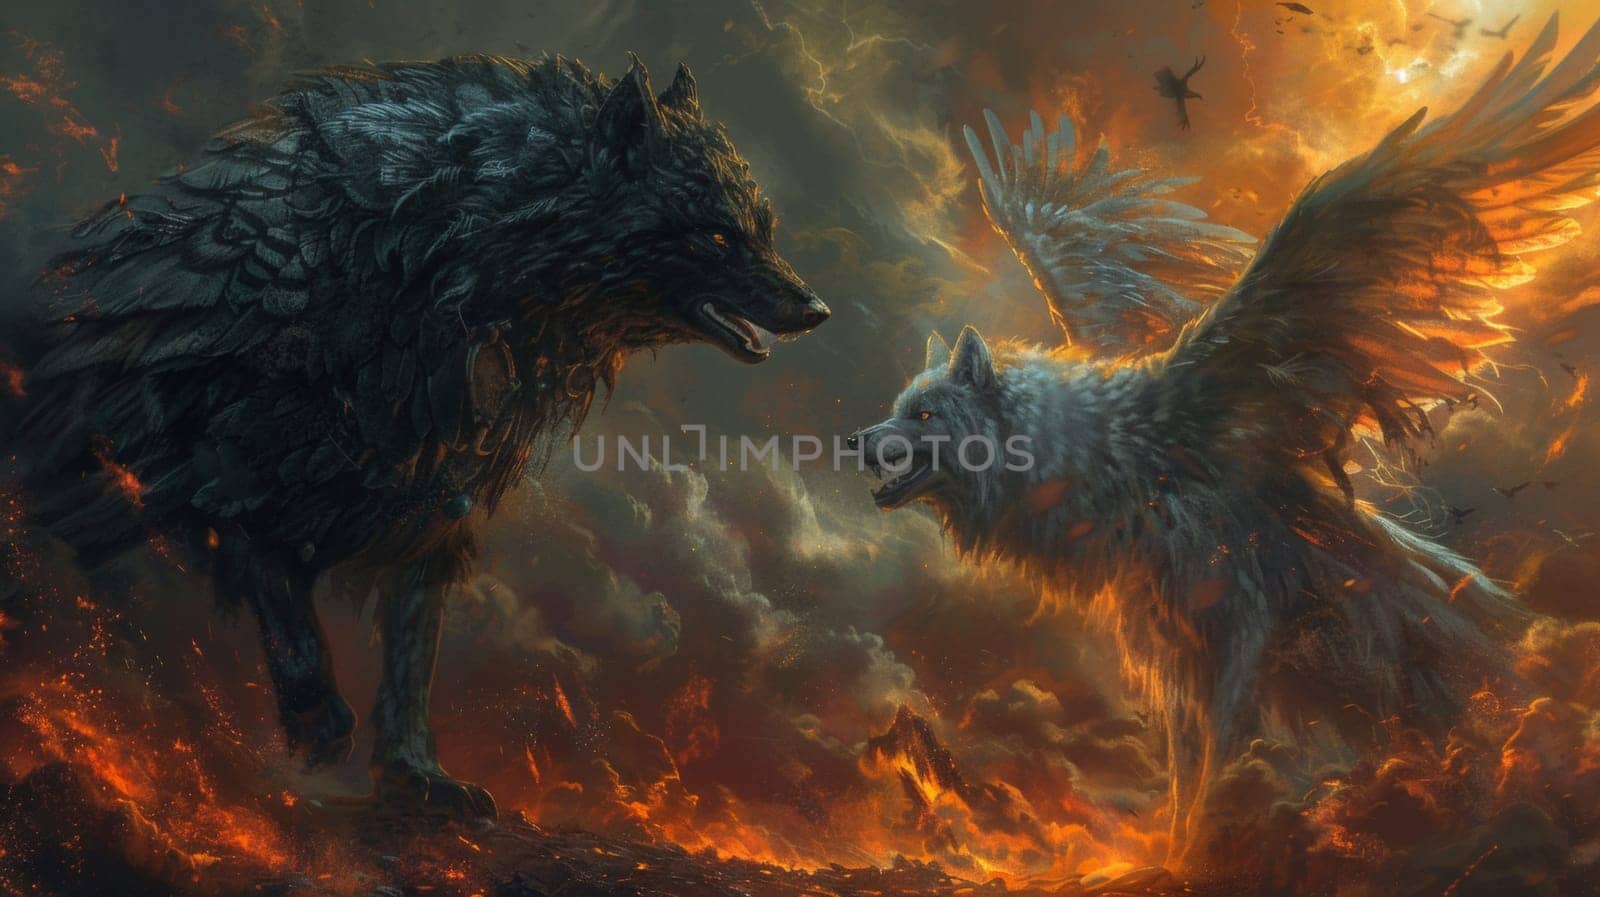 Two wolves fighting in a fiery landscape with flames and fire